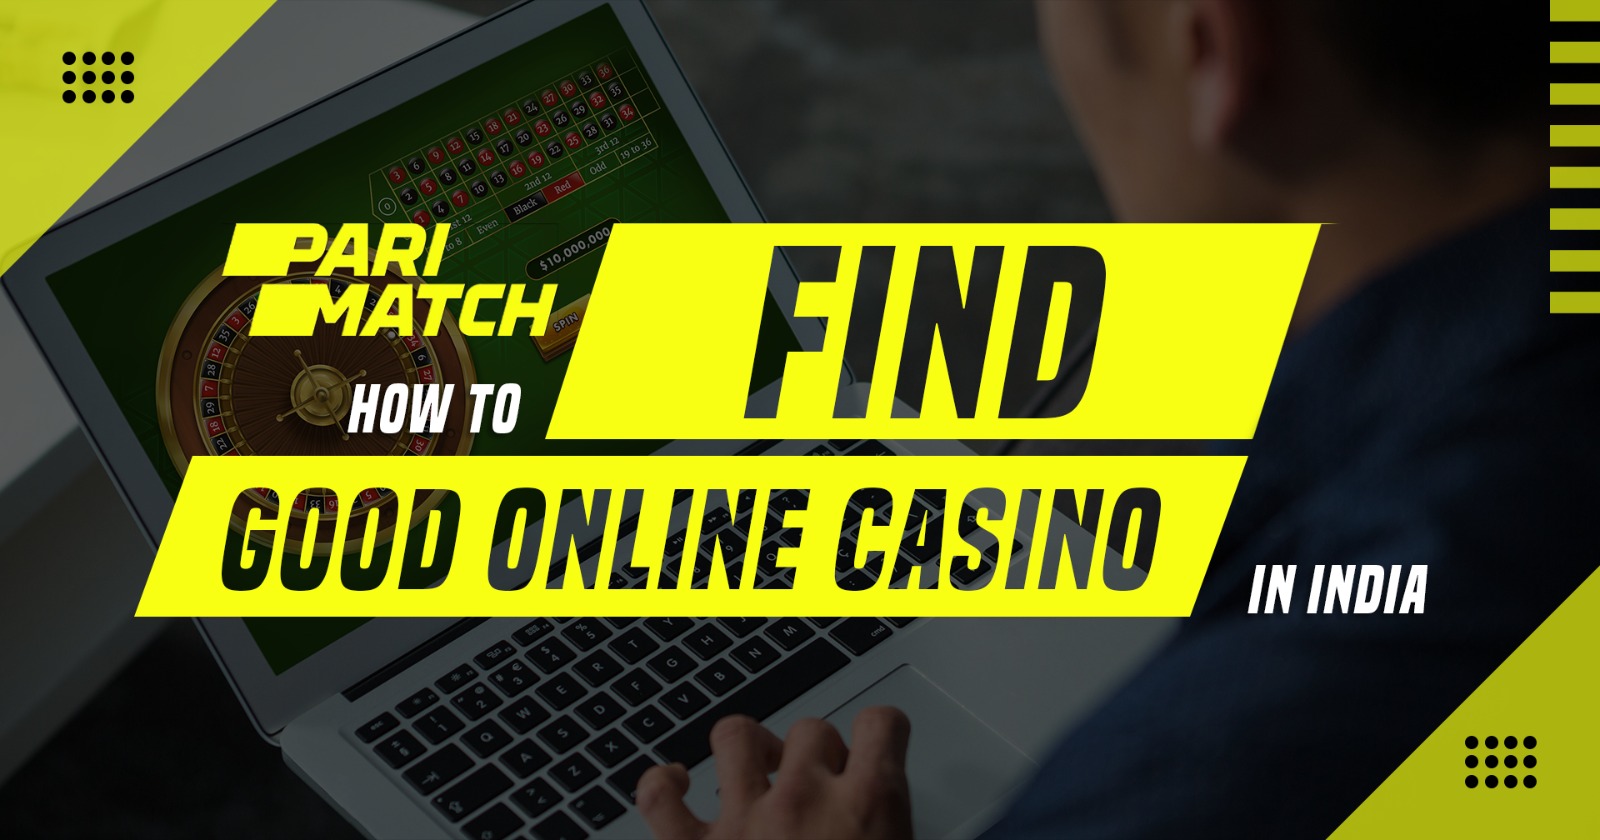 How to Find Good Online Casino in India